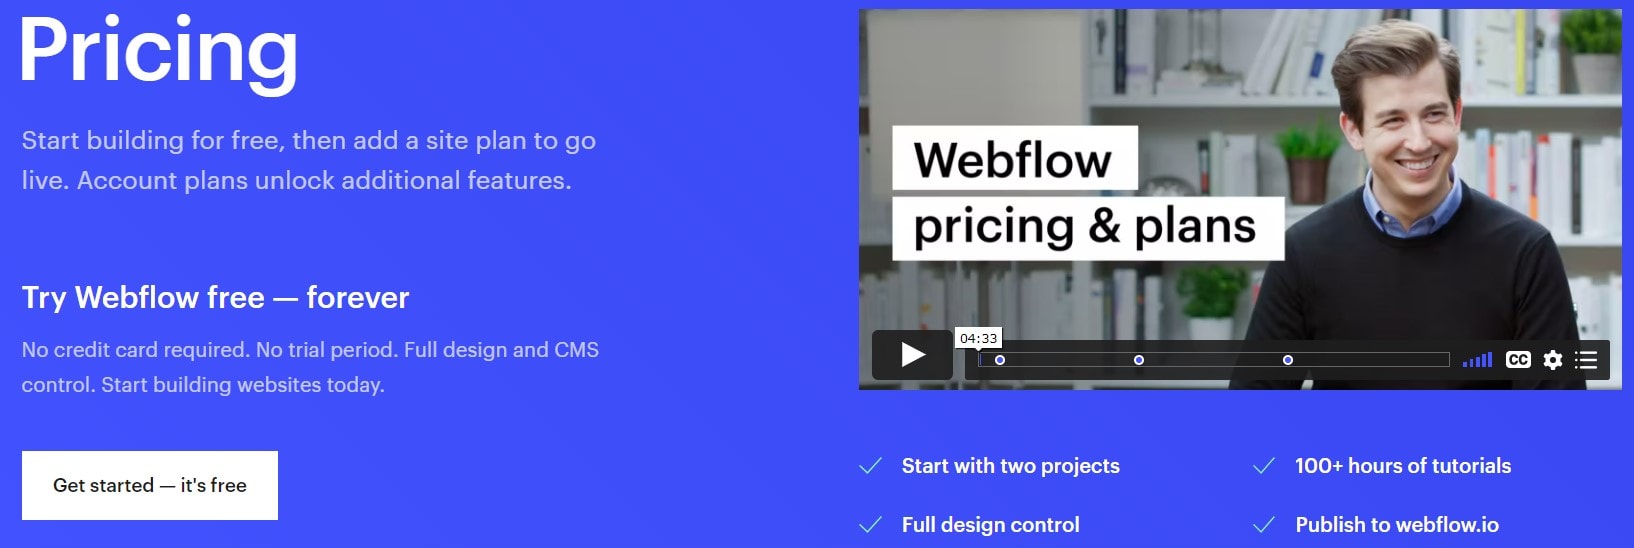 Webflow Pricing How To Select a Webflow Plan Ideal For You